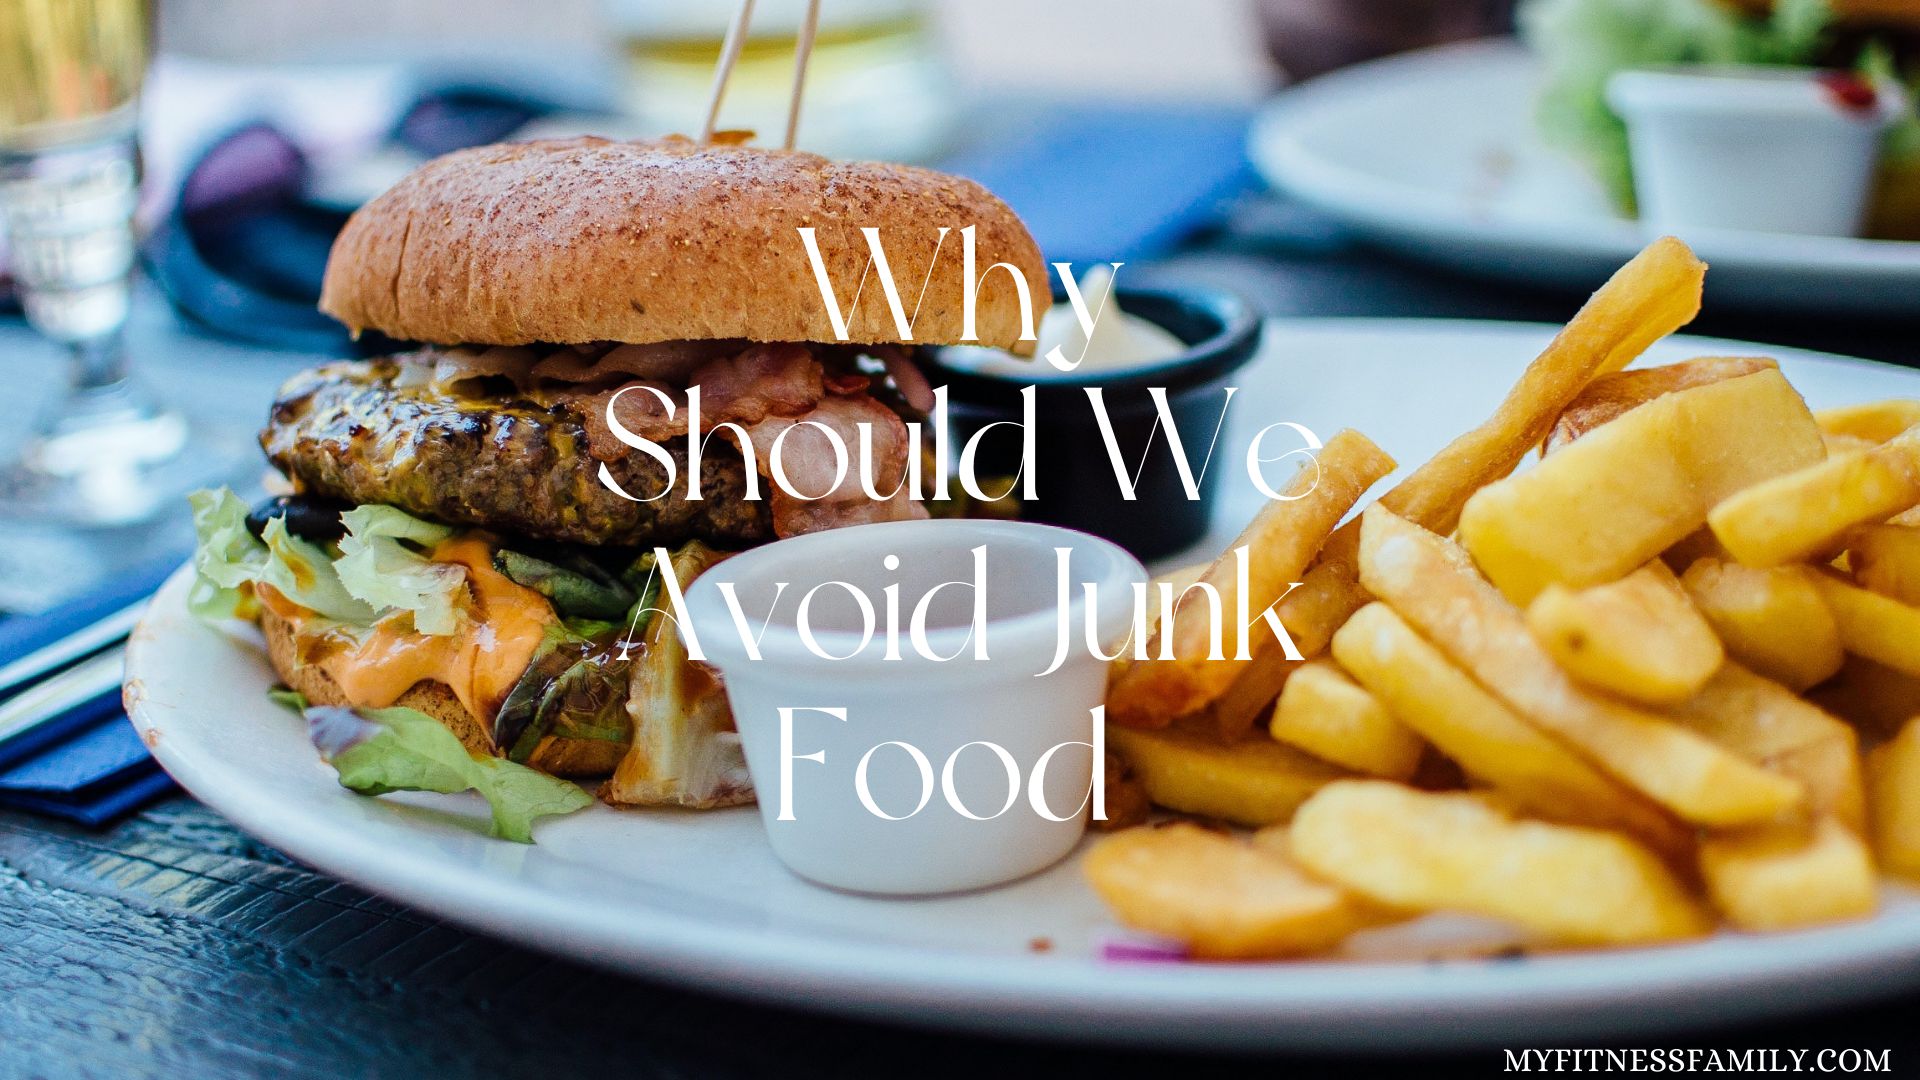 Why Should We Avoid Junk Food